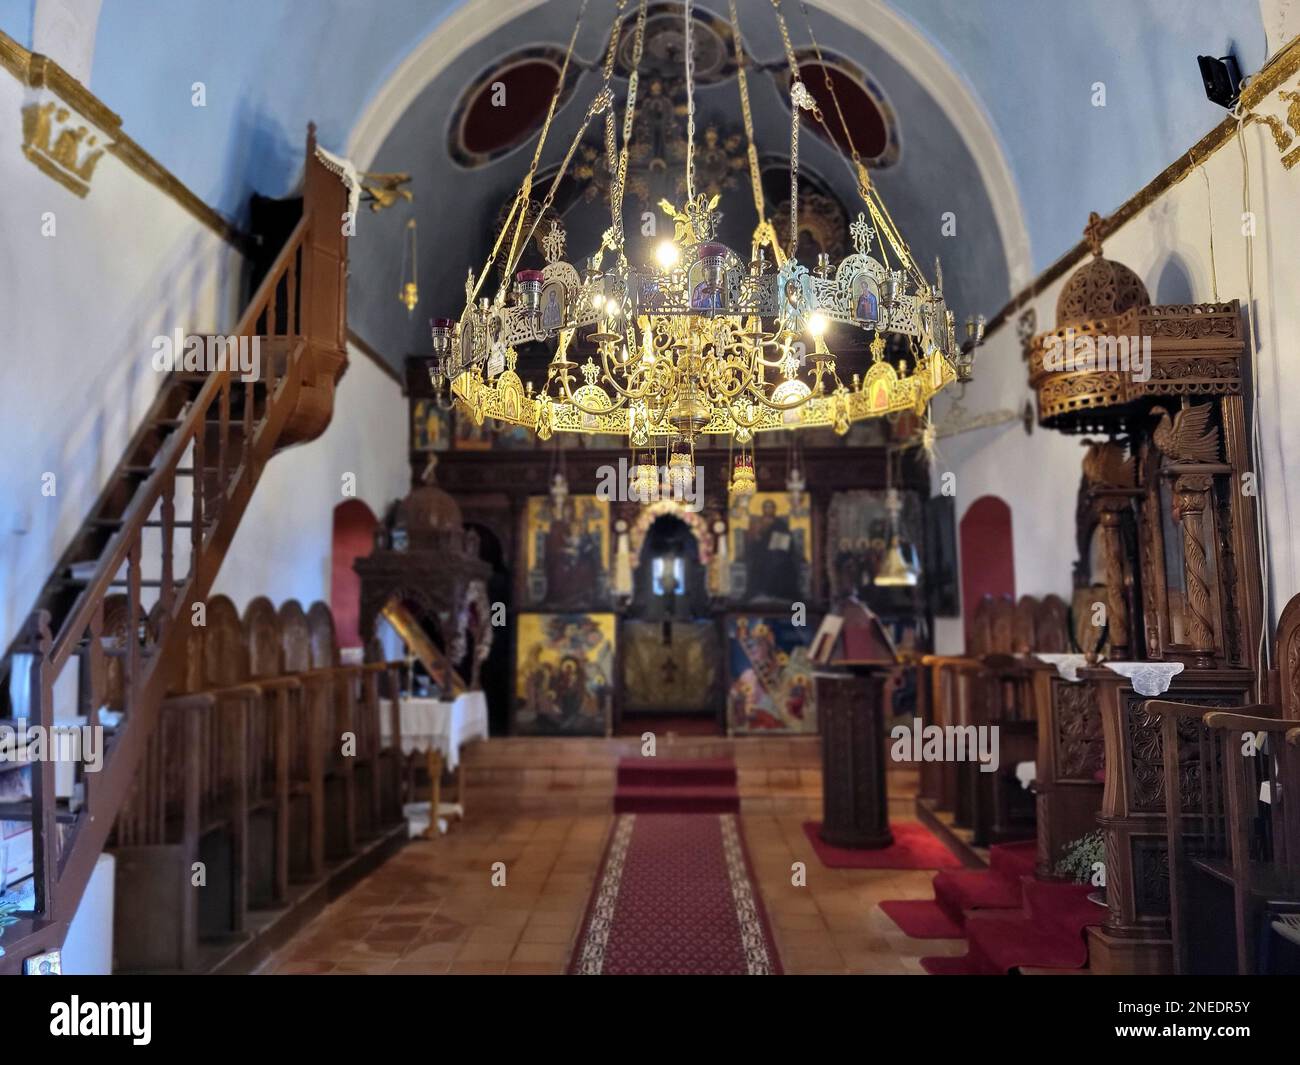 Greece, inside orthodox church on Lasithi Plateau with artistically worked chandelier Stock Photo